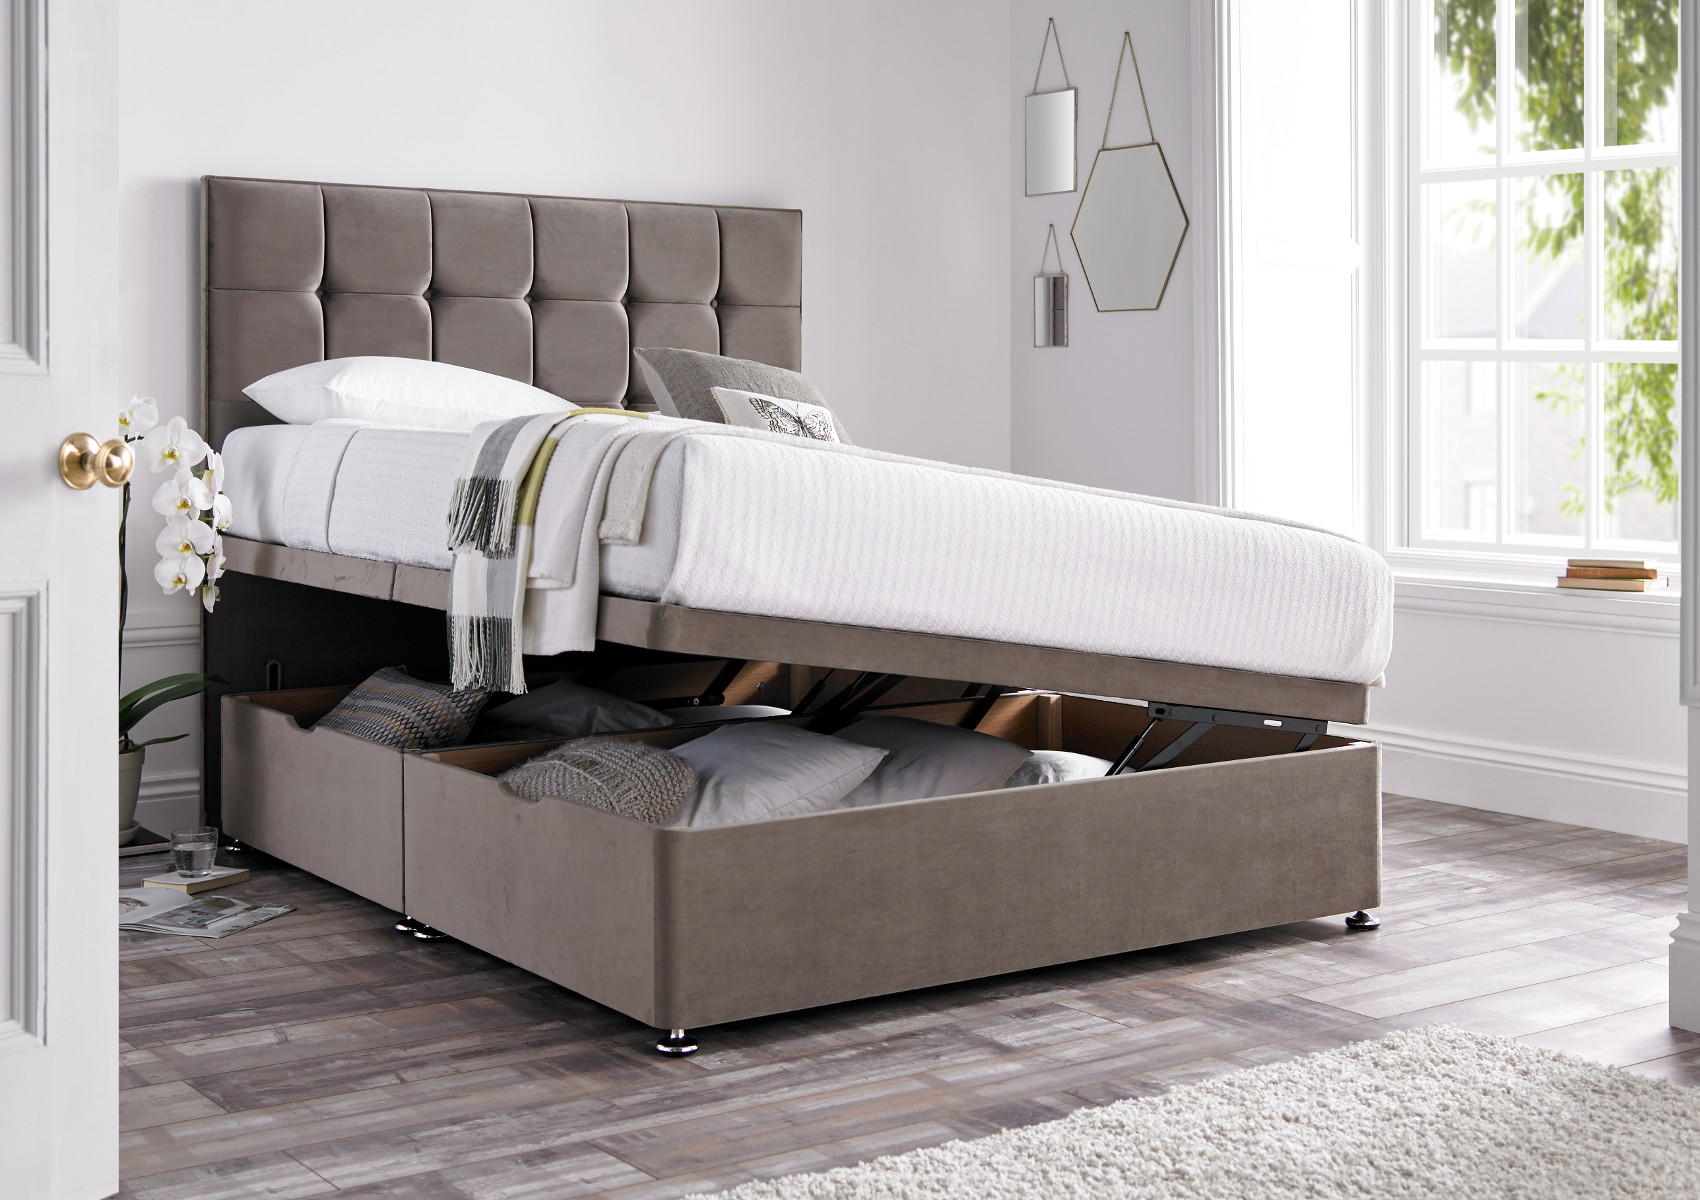 View Harbour Shetland Mercury Upholstered King Size Ottoman Bed Time4Sleep information